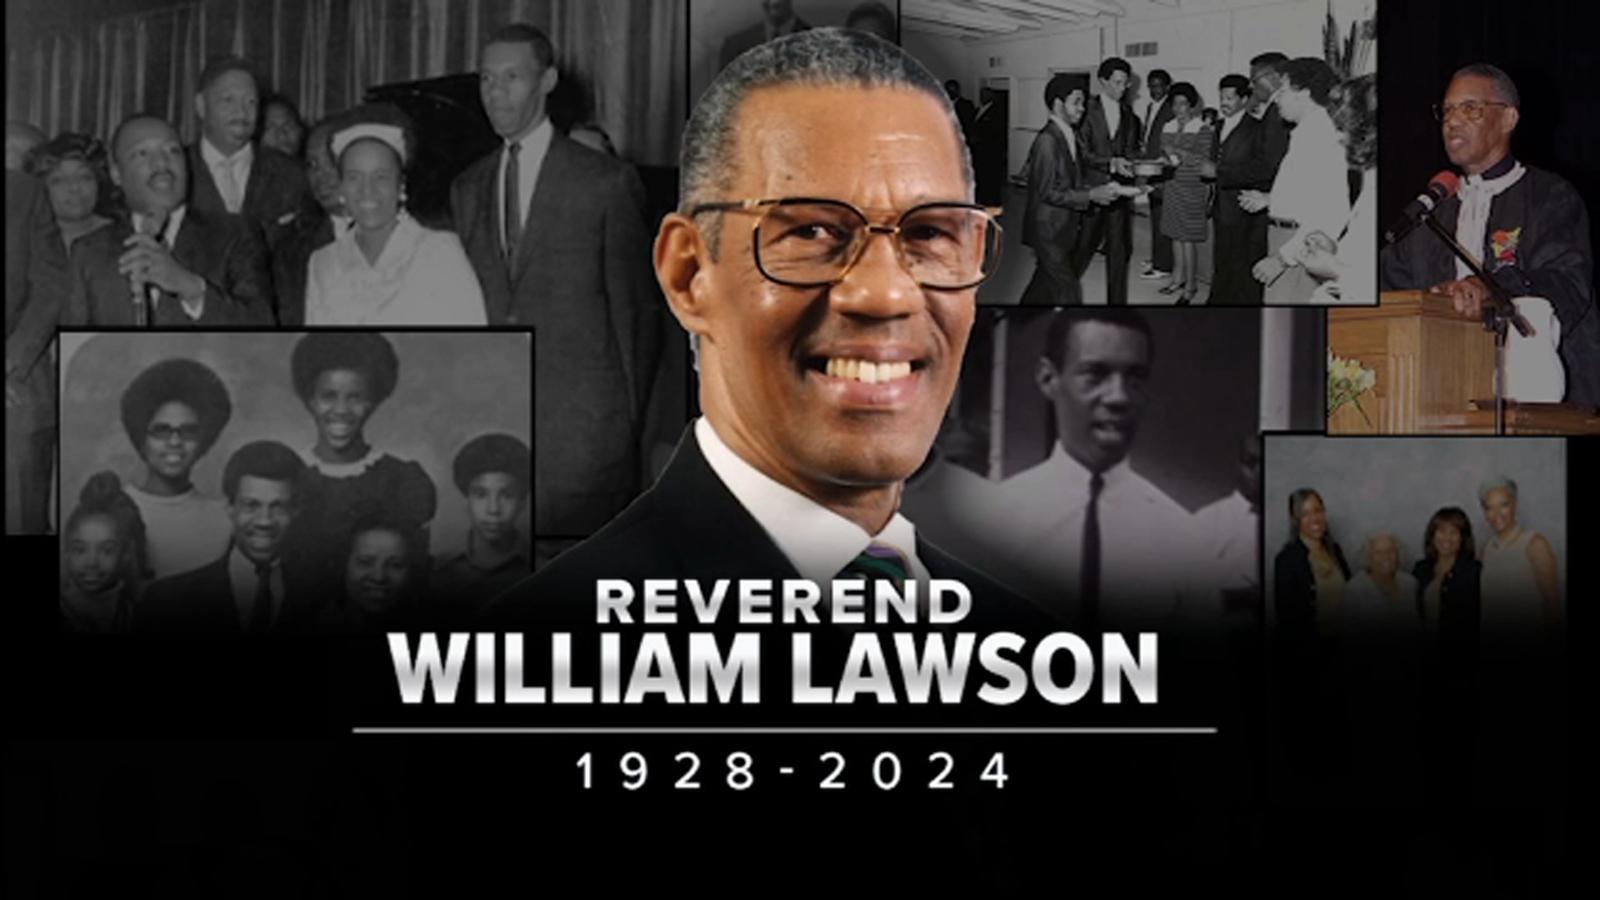 Rev. Bill Lawson, founder of Wheeler Avenue Baptist Church and civil rights icon, dies at 95